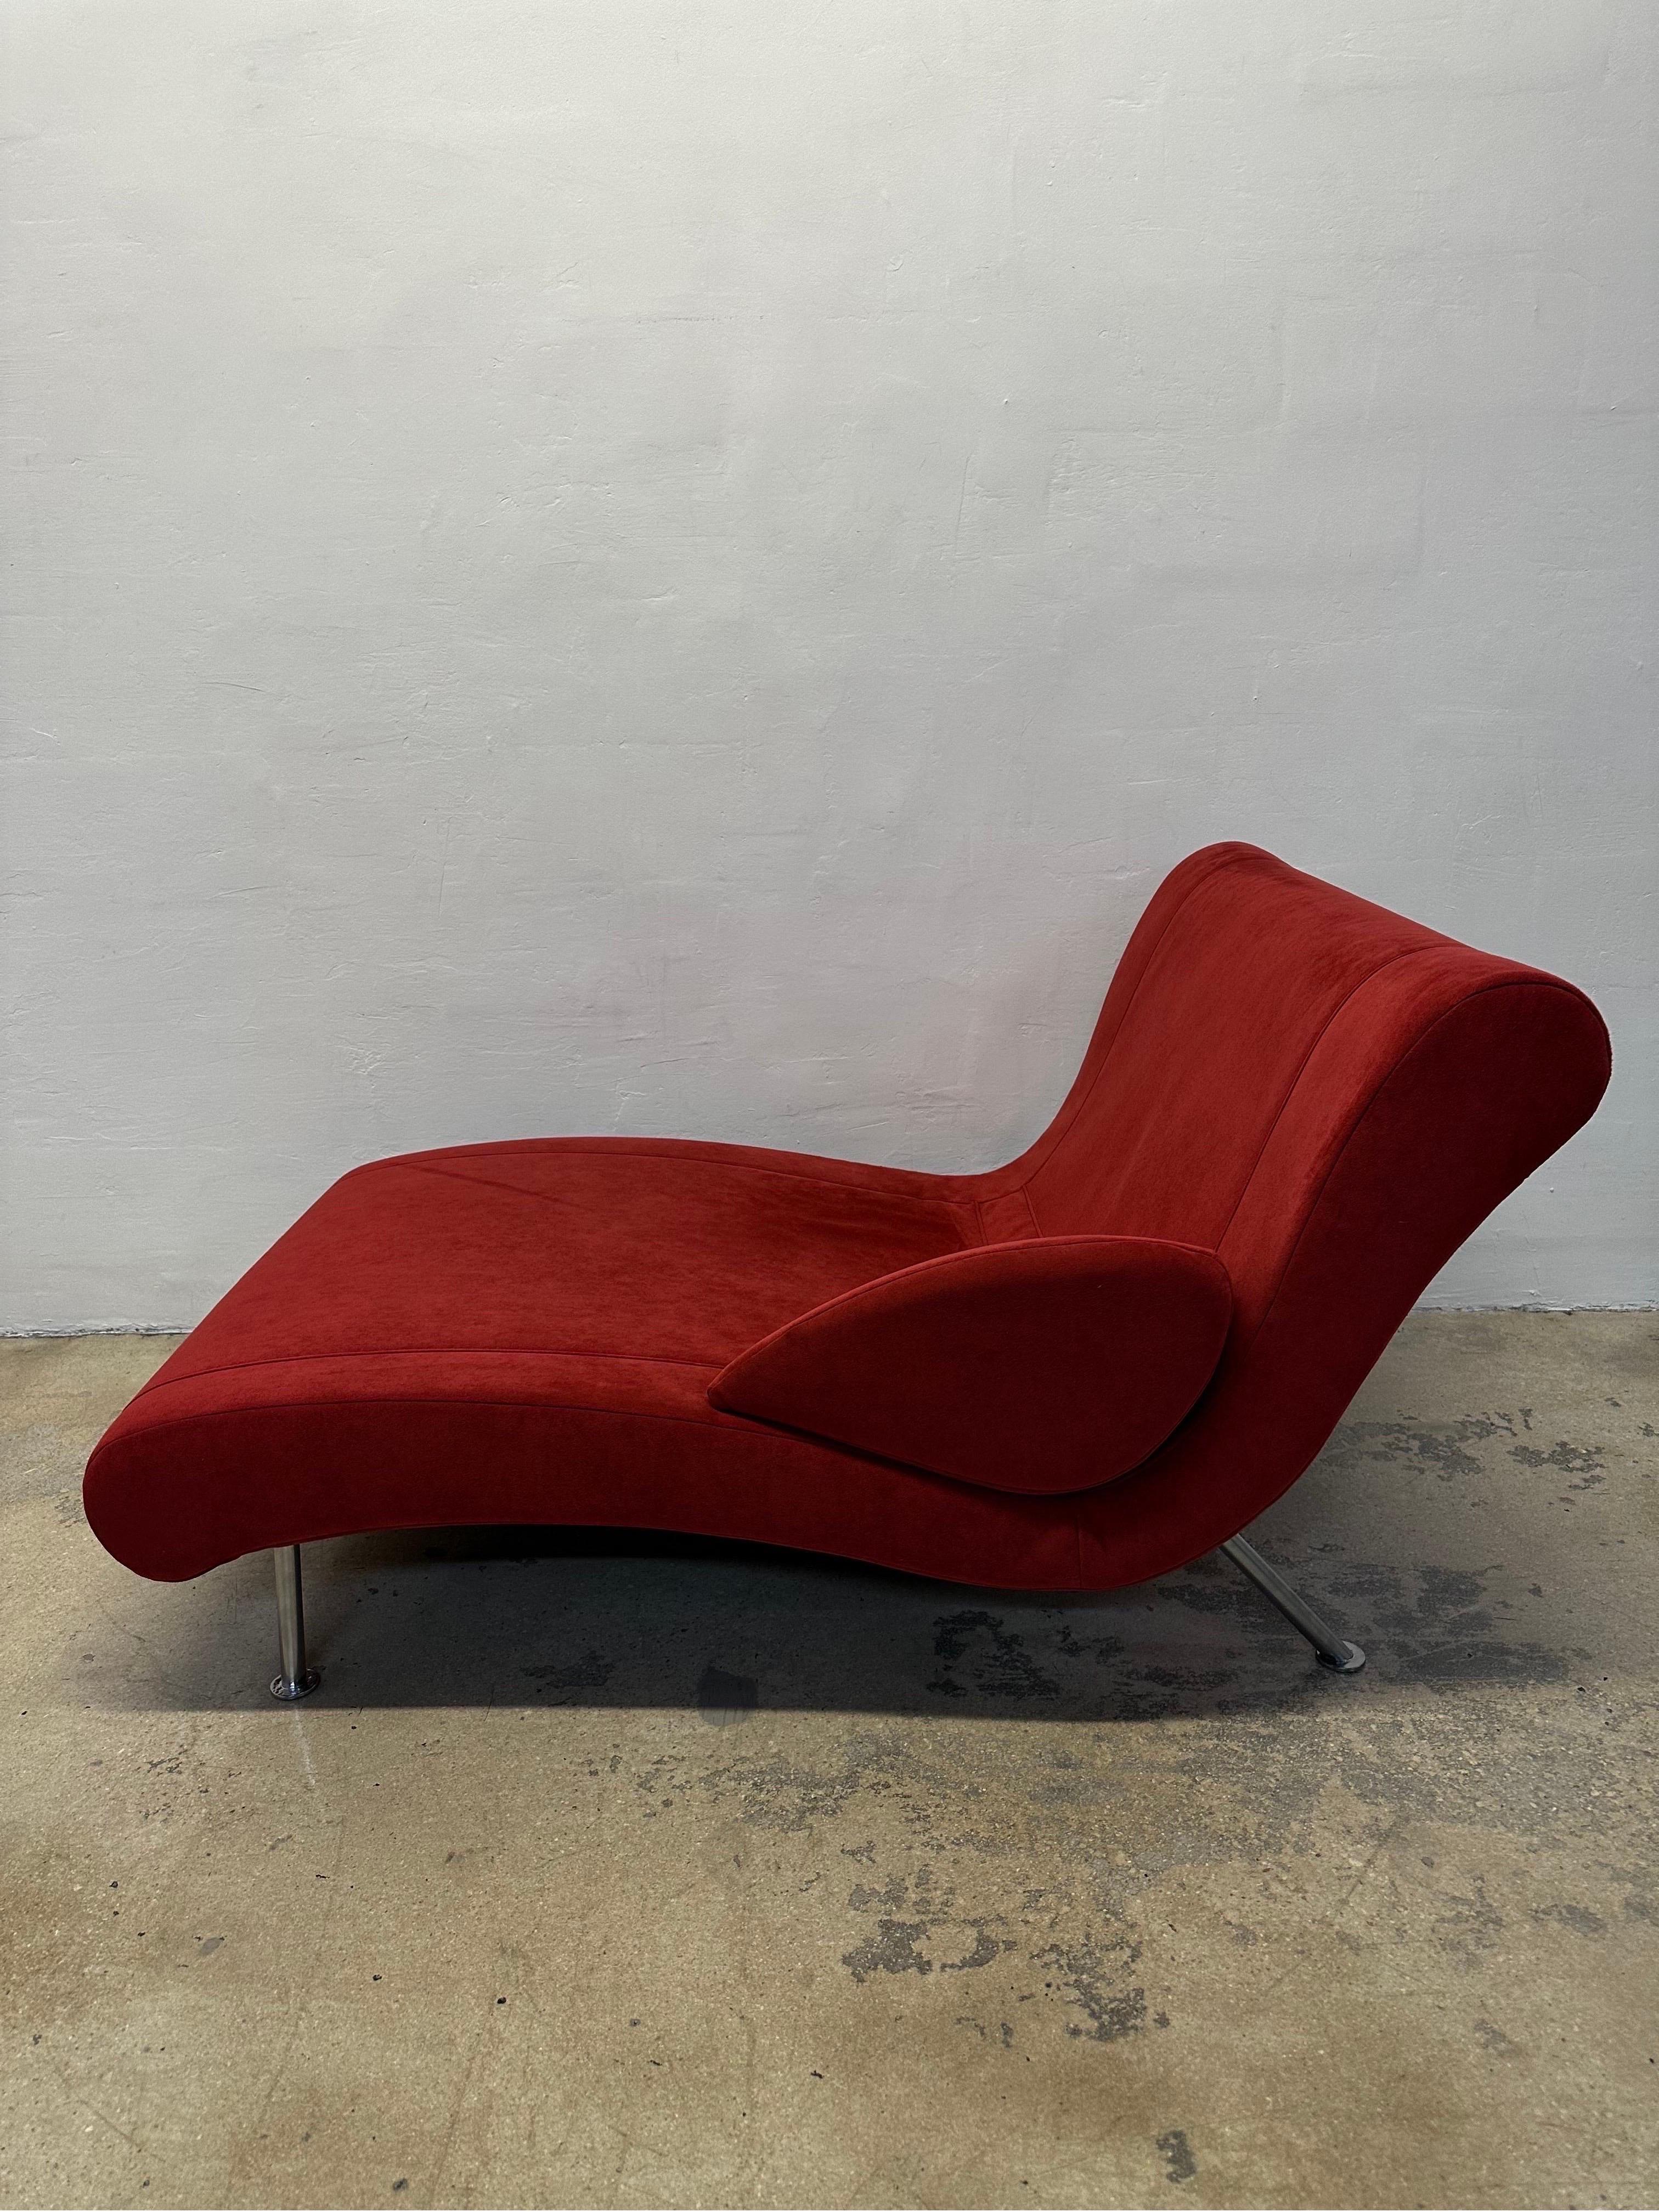 Steel Pascal Mourgue Dolce Vita Chaise Lounge for Cinna Ligne Roset For Sale